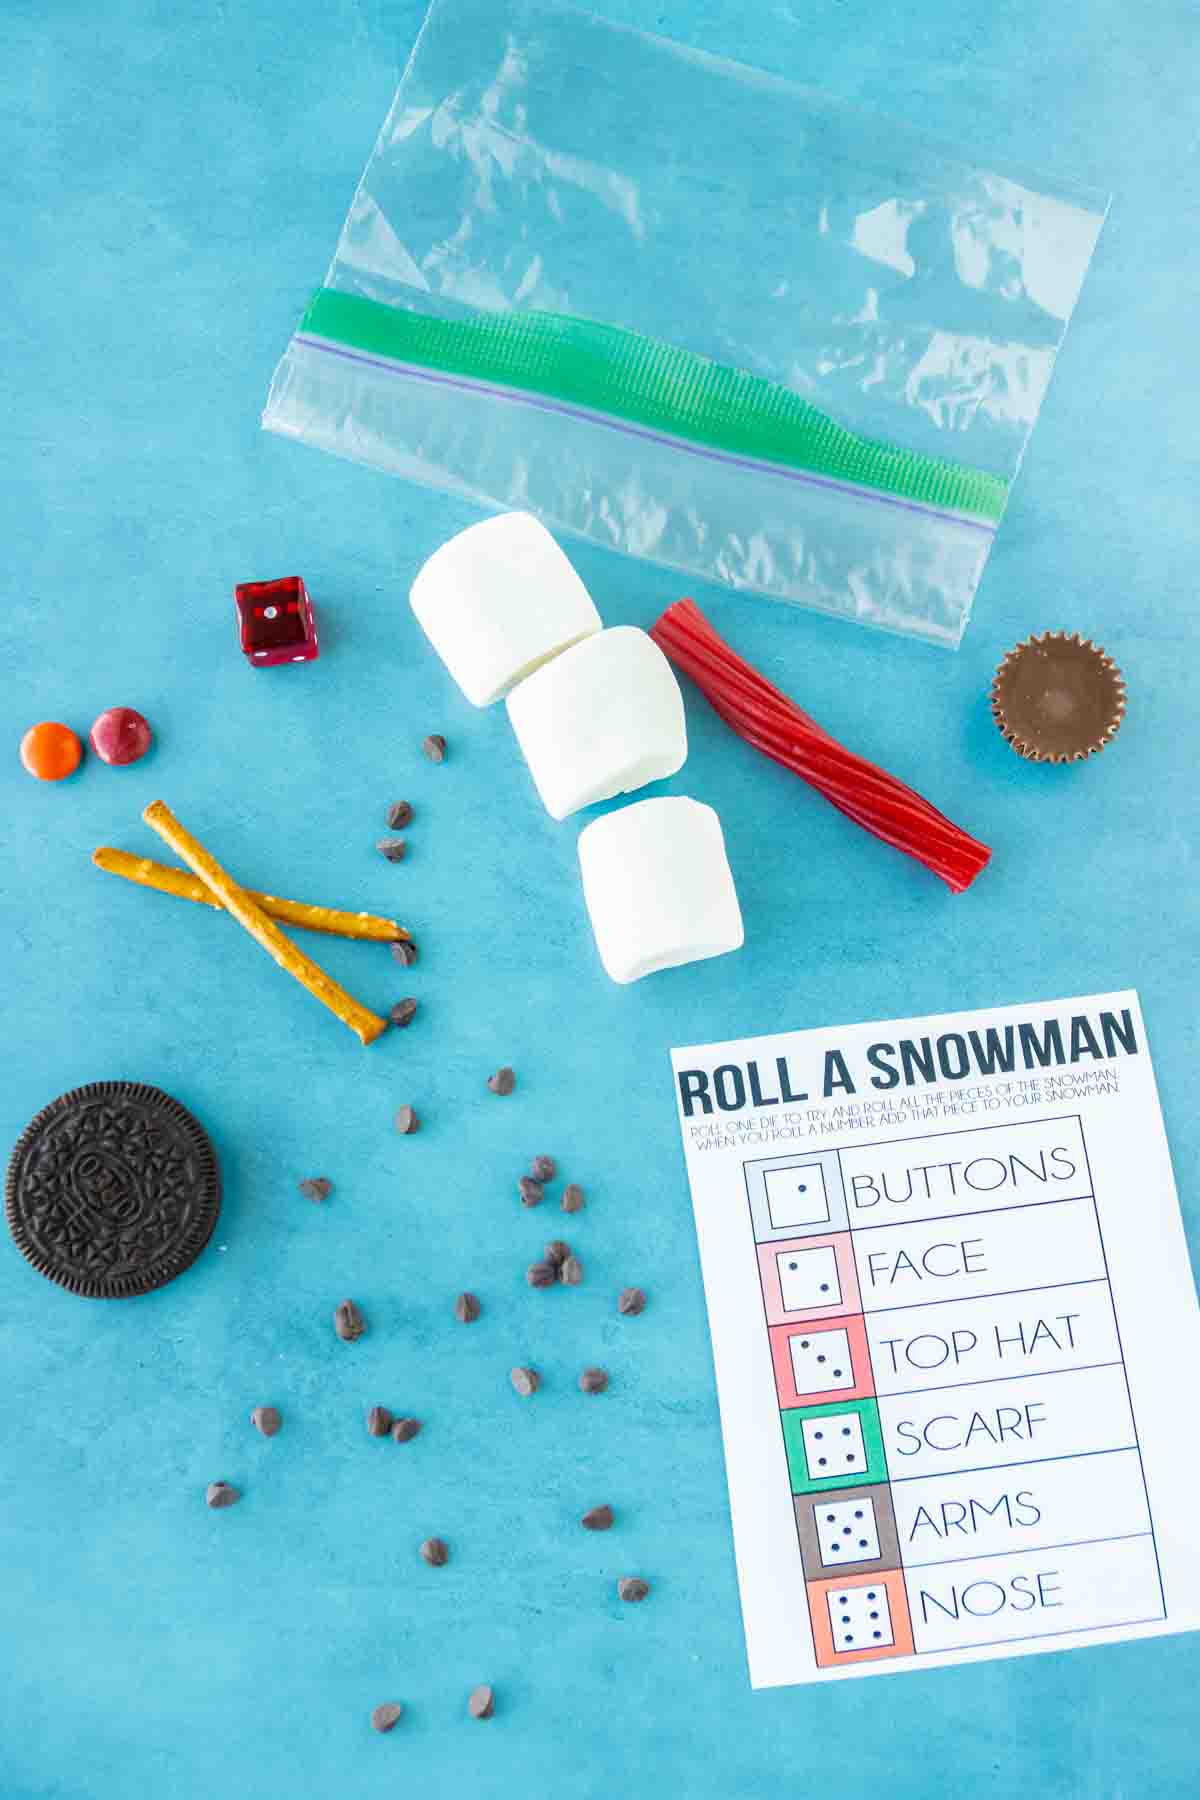 supplies needed to play roll a snowman